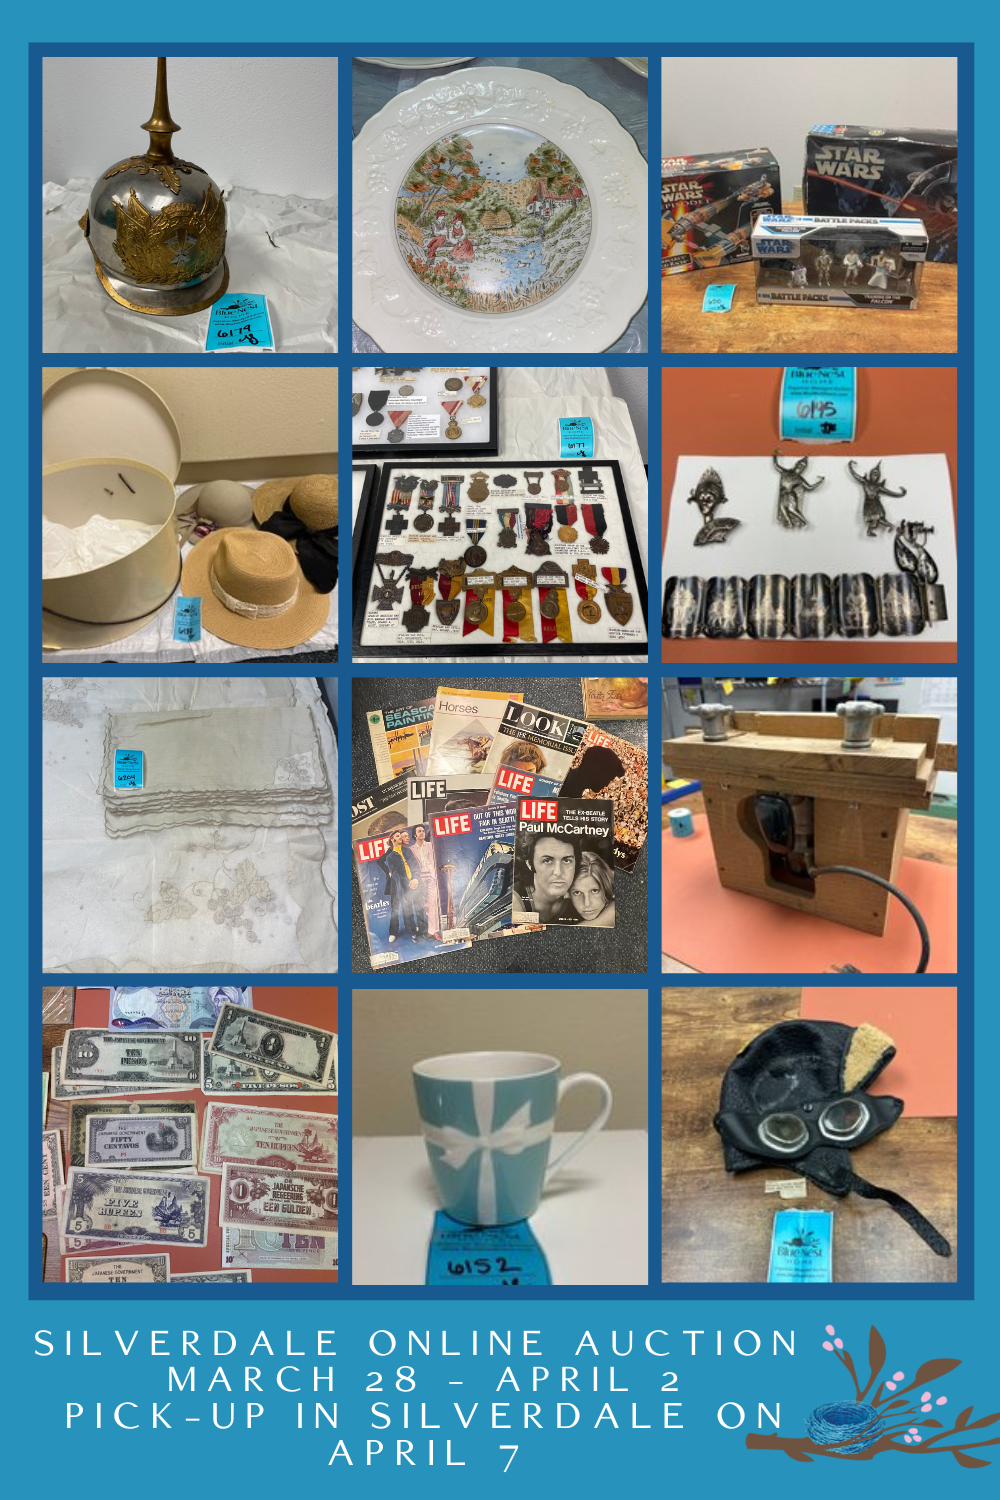 This auction features an assortment of military helmets (WWI, WWII, Vietnam), WWII military memorabilia and collector items, war medal collection, Viet Cong cup, vintage LIFE magazines, hats with hat boxes, Set Of 6 Gien France Scenes De La Vie Paysanne Dinner Plates, assortment of women's purses, vintage table cloths and napkins, silver jewelry, hot wheels track sets, Disney World collector items, serving dishes and bowls, Star Wars memorabilia, and a vintage jig saw.